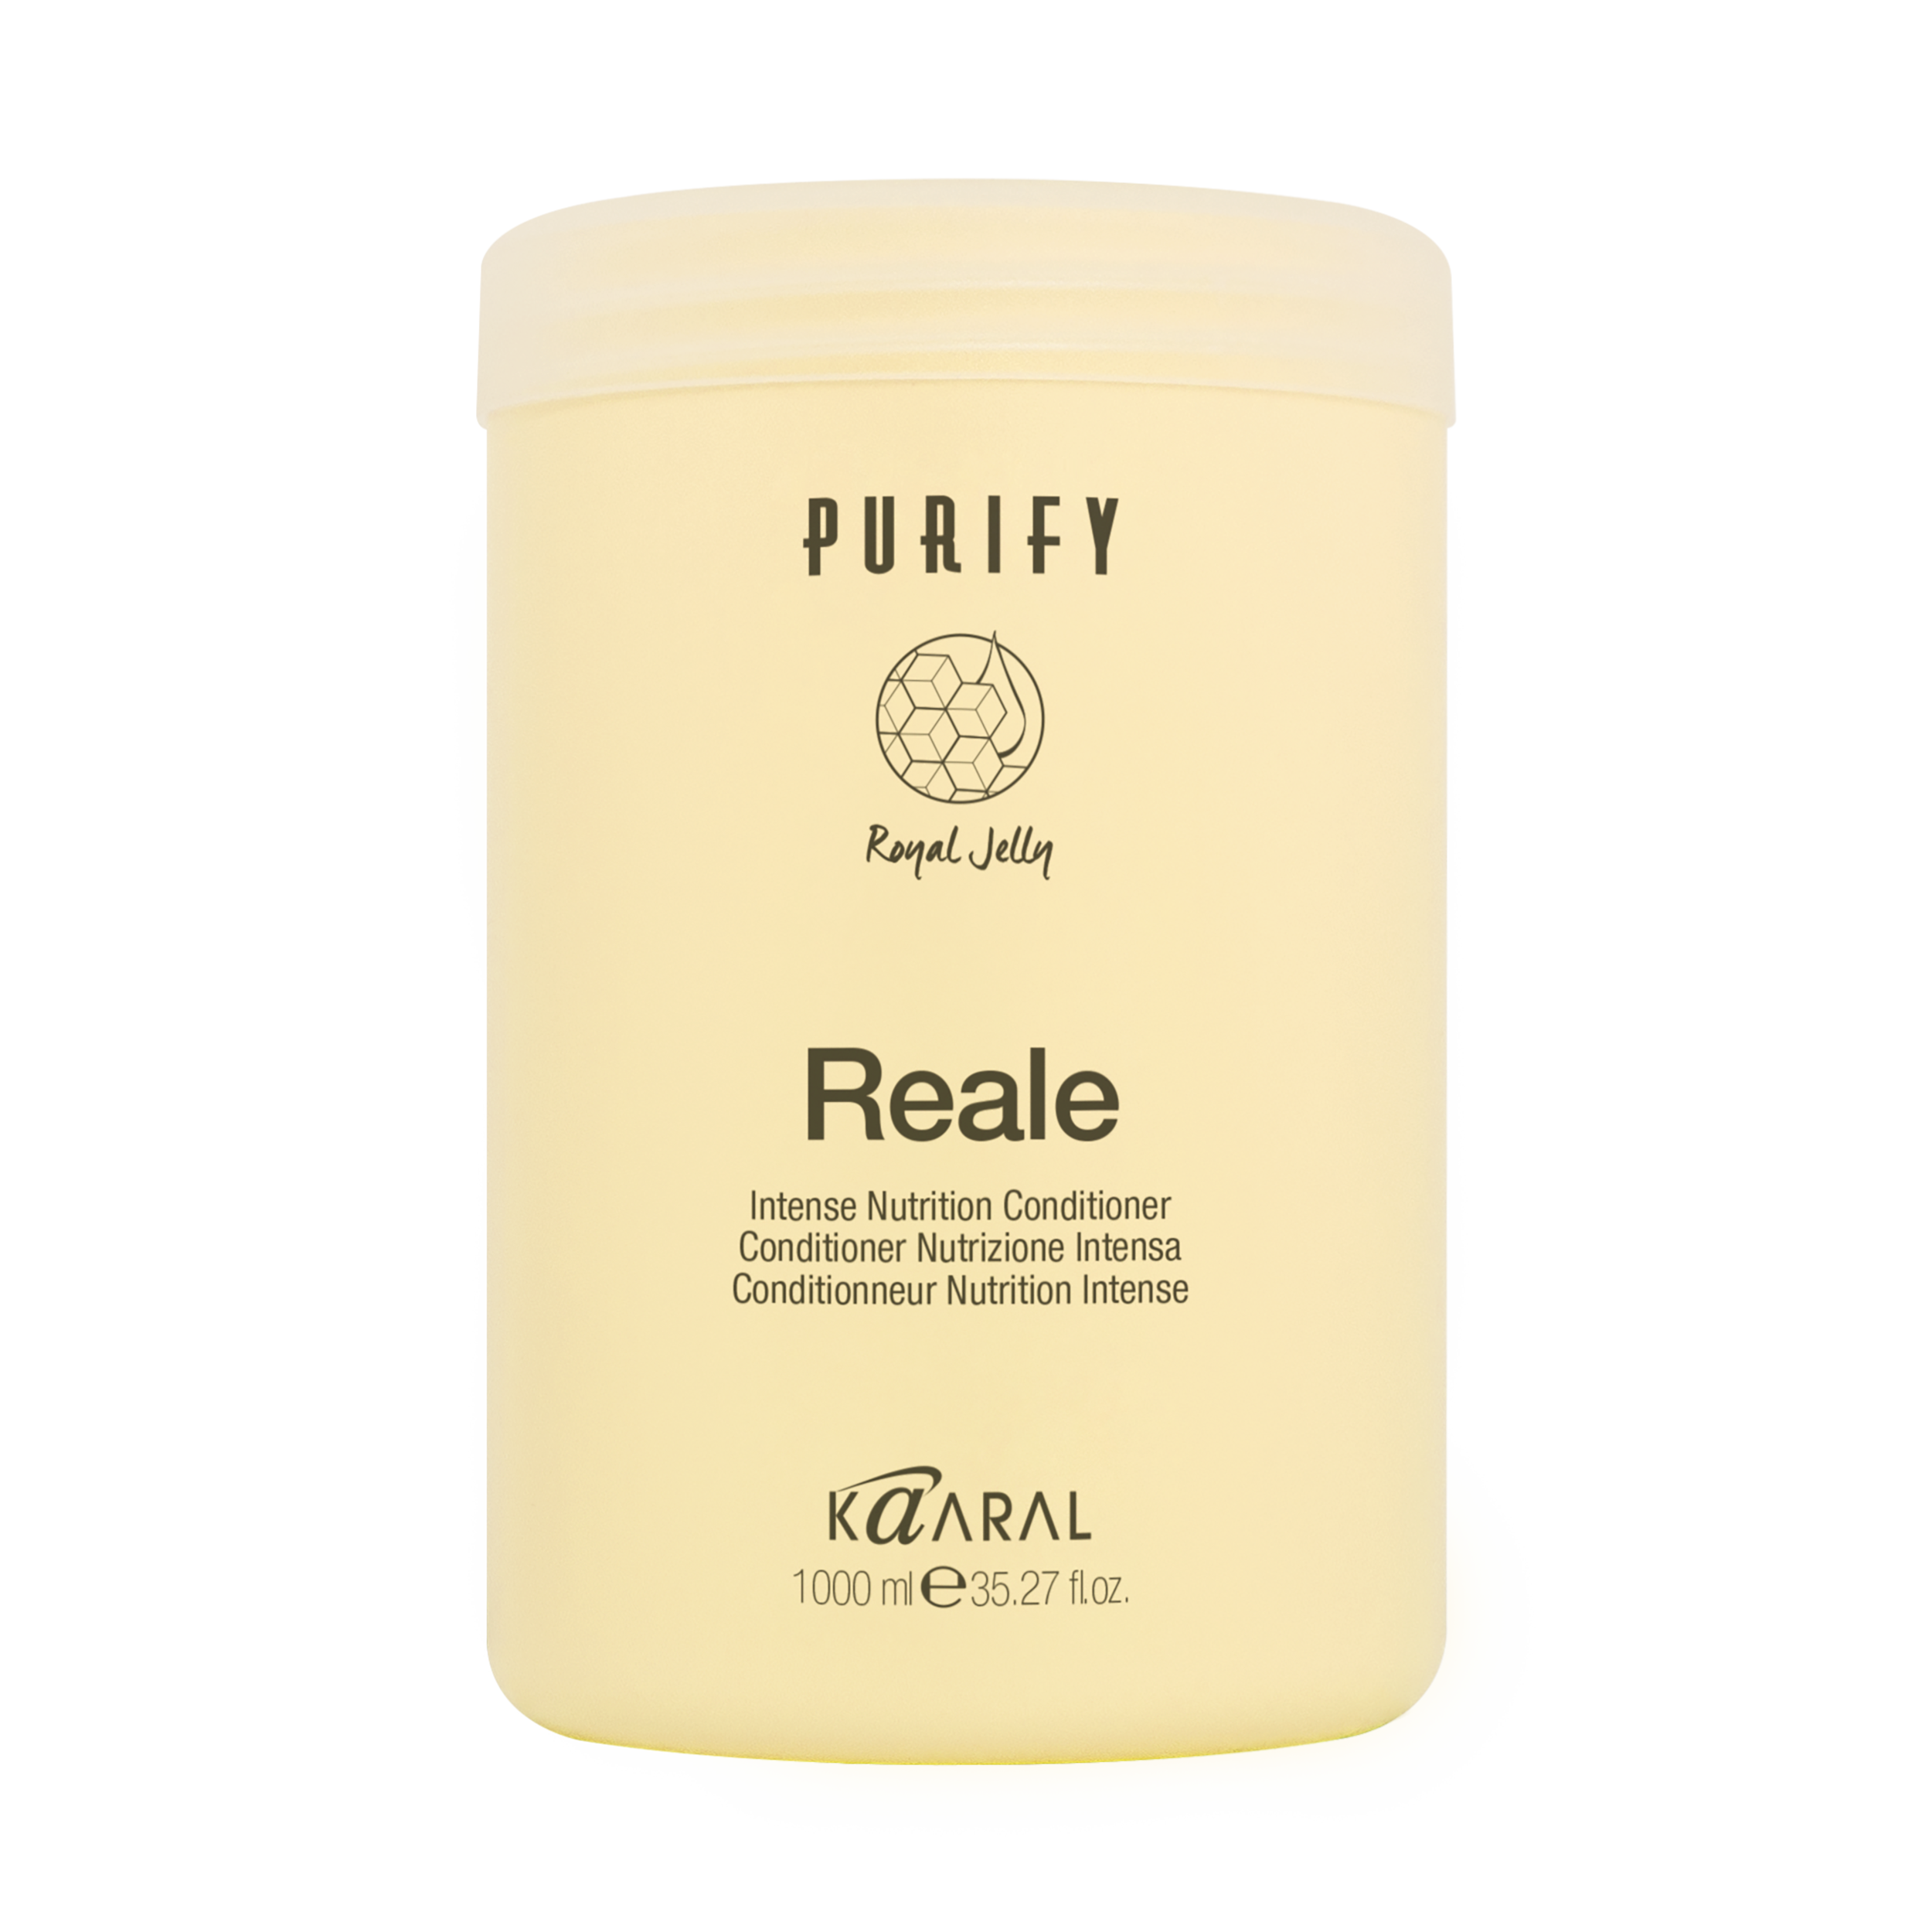 Kaaral - Purify Reale Conditioner Liter Size - Creata Beauty - Professional Beauty Products